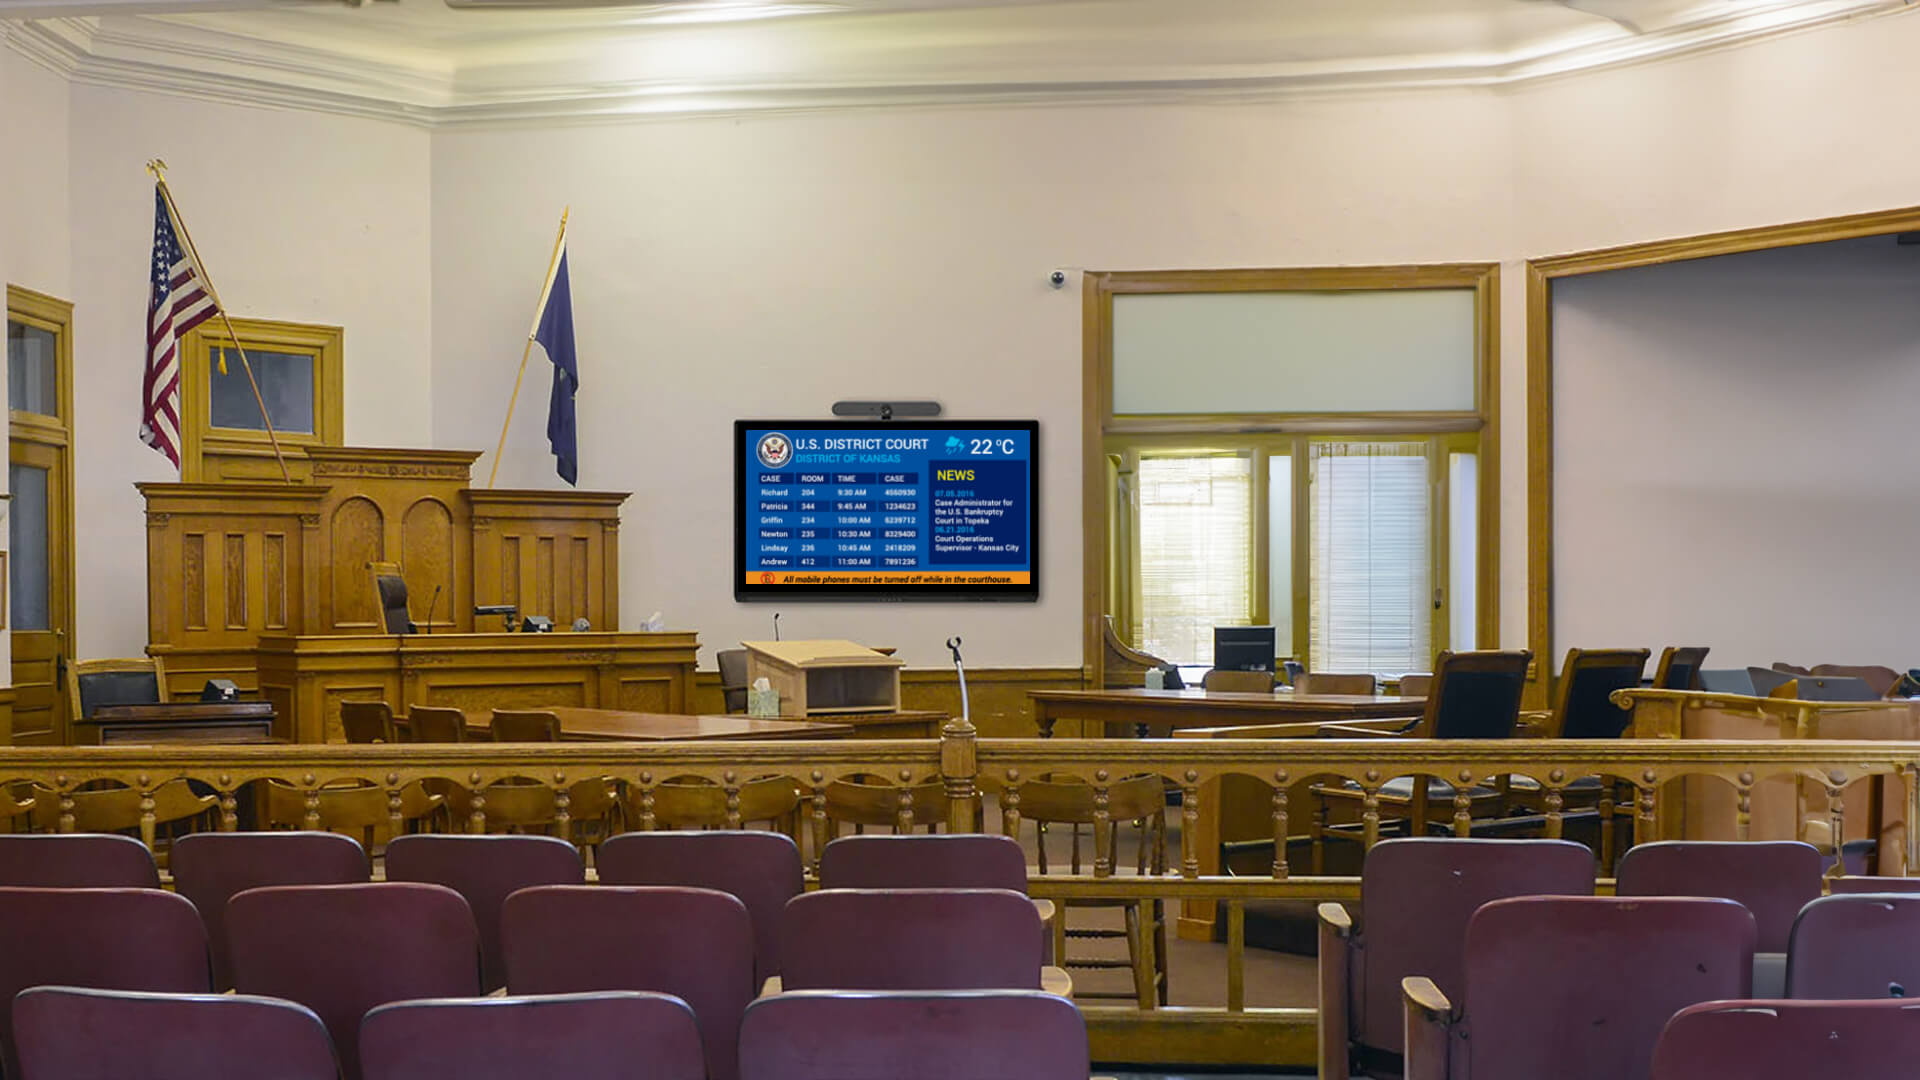 Digital signage being utilized to show real time data in a court